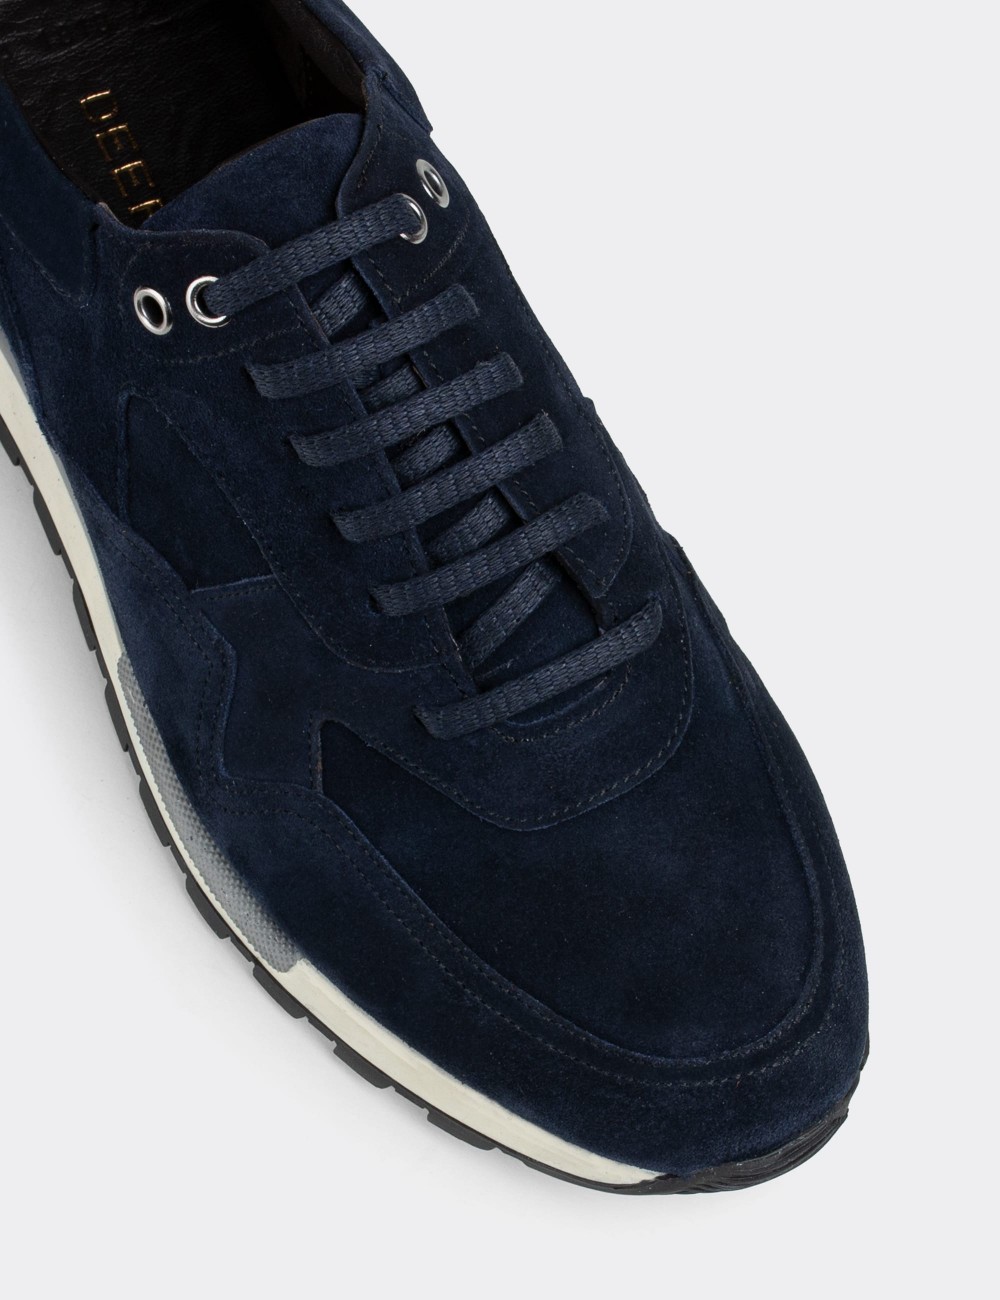 Navy Suede Leather Sneakers - 01818MLCVT01